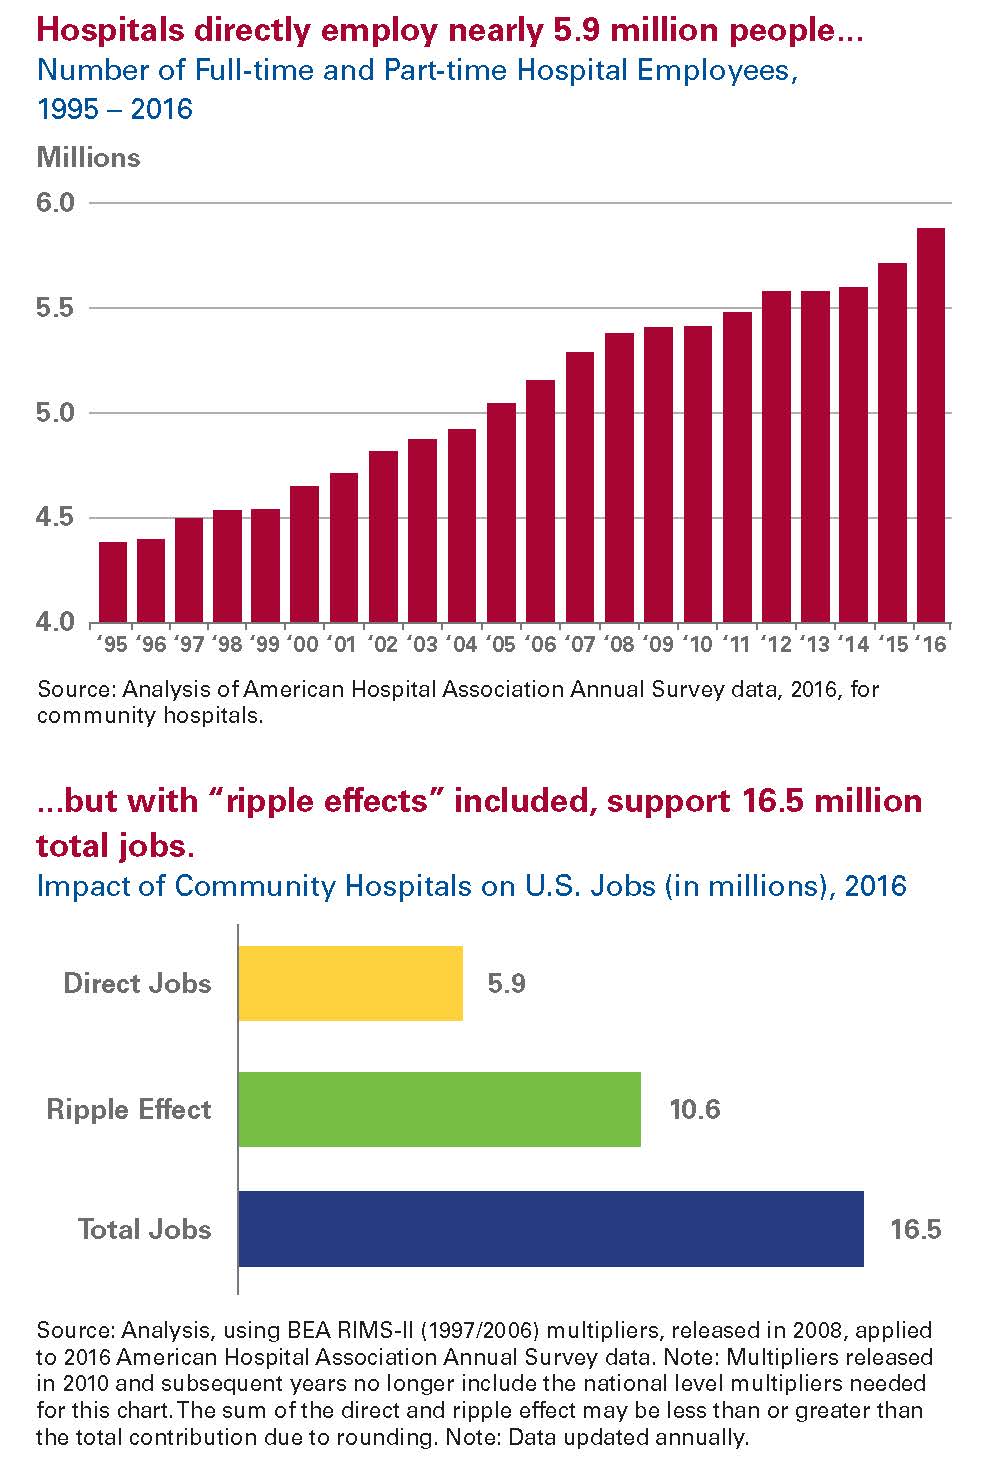 Hospitals directly employ nearly 5.9 million people infographic